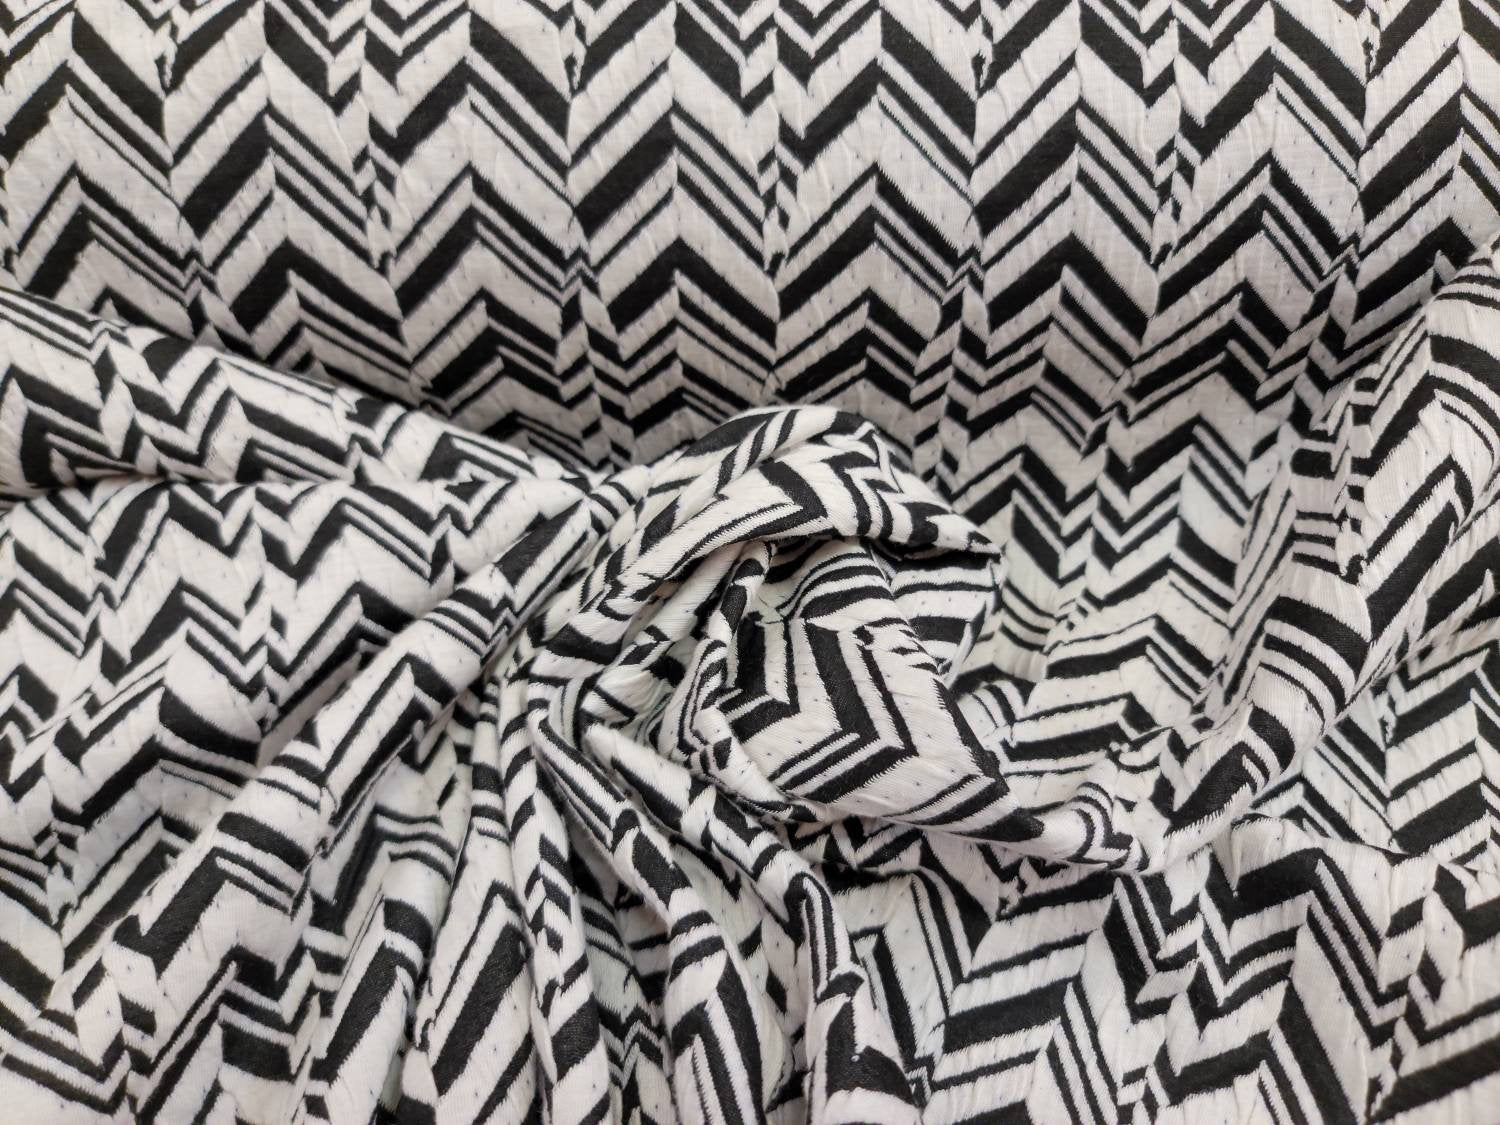 Black and White Fabric Herringbone Tweed-look in Black and White by  Willowlanetextiles Printed Cotton Fabric by the Yard With Spoonflower 